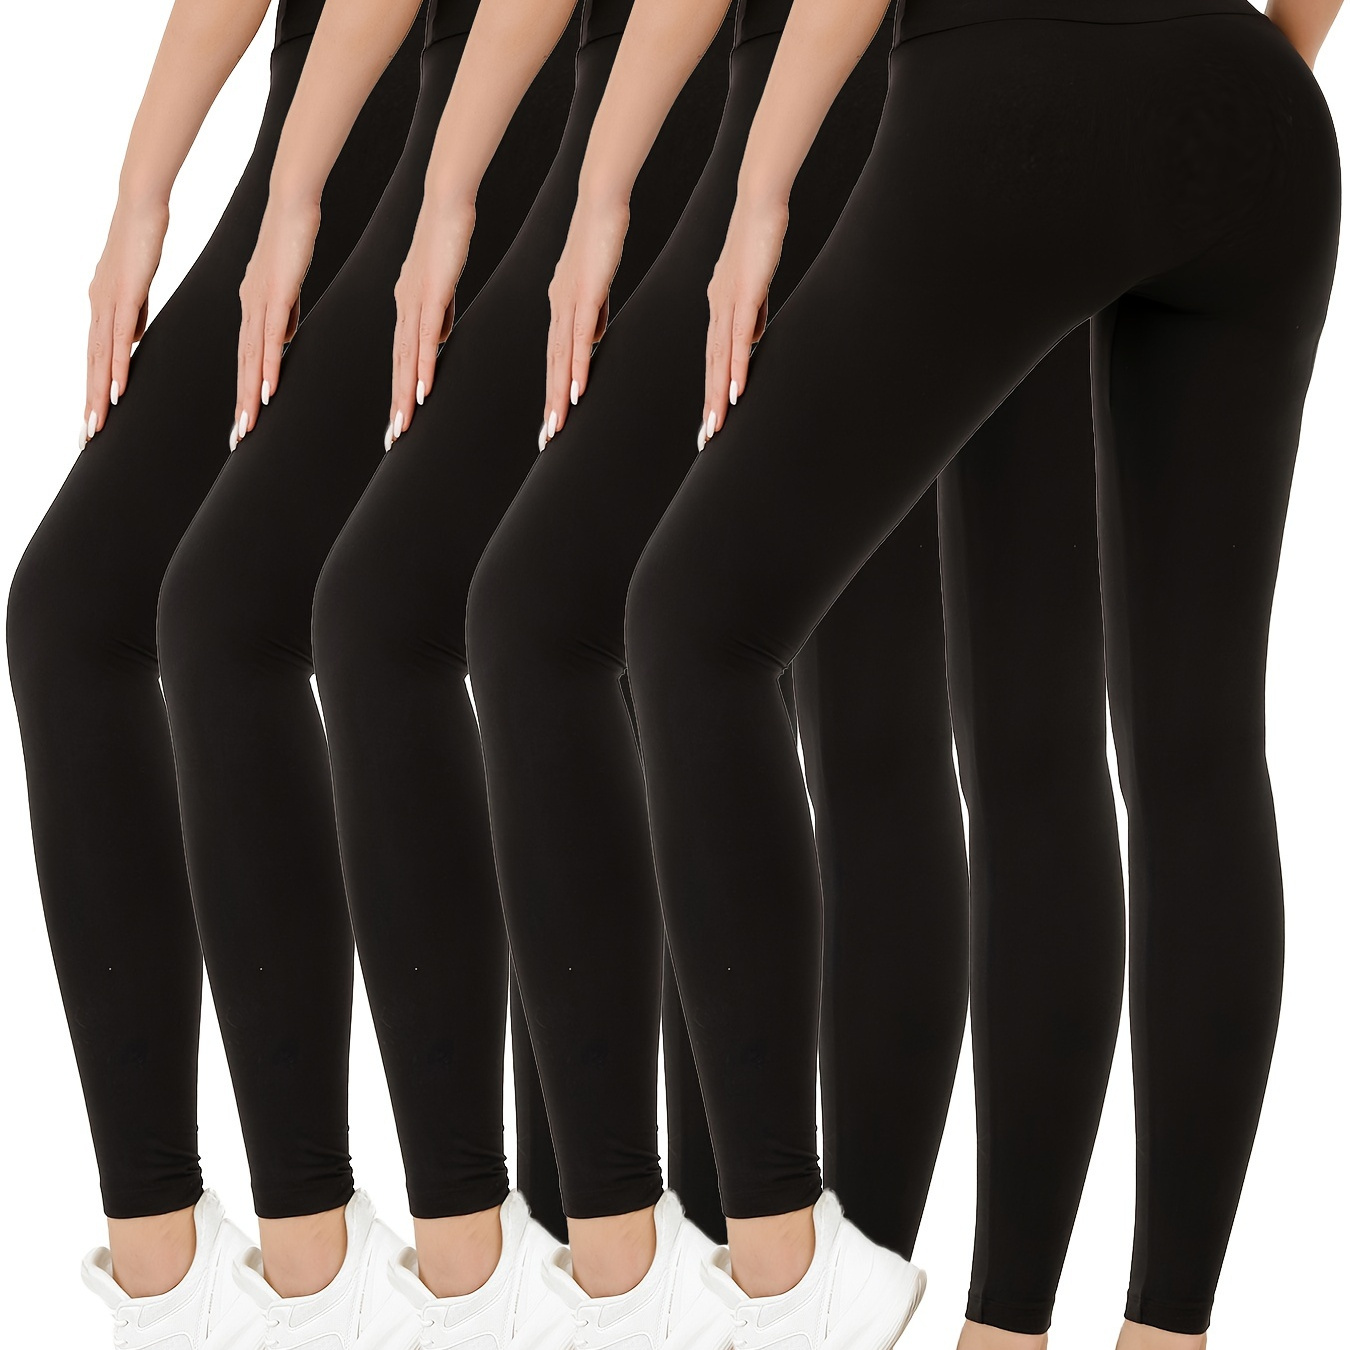 

5pcs Super Soft Leggings For Women, High Waisted Tummy Control No See Through Workout Yoga Running Pants Leggings, Women's Activewear